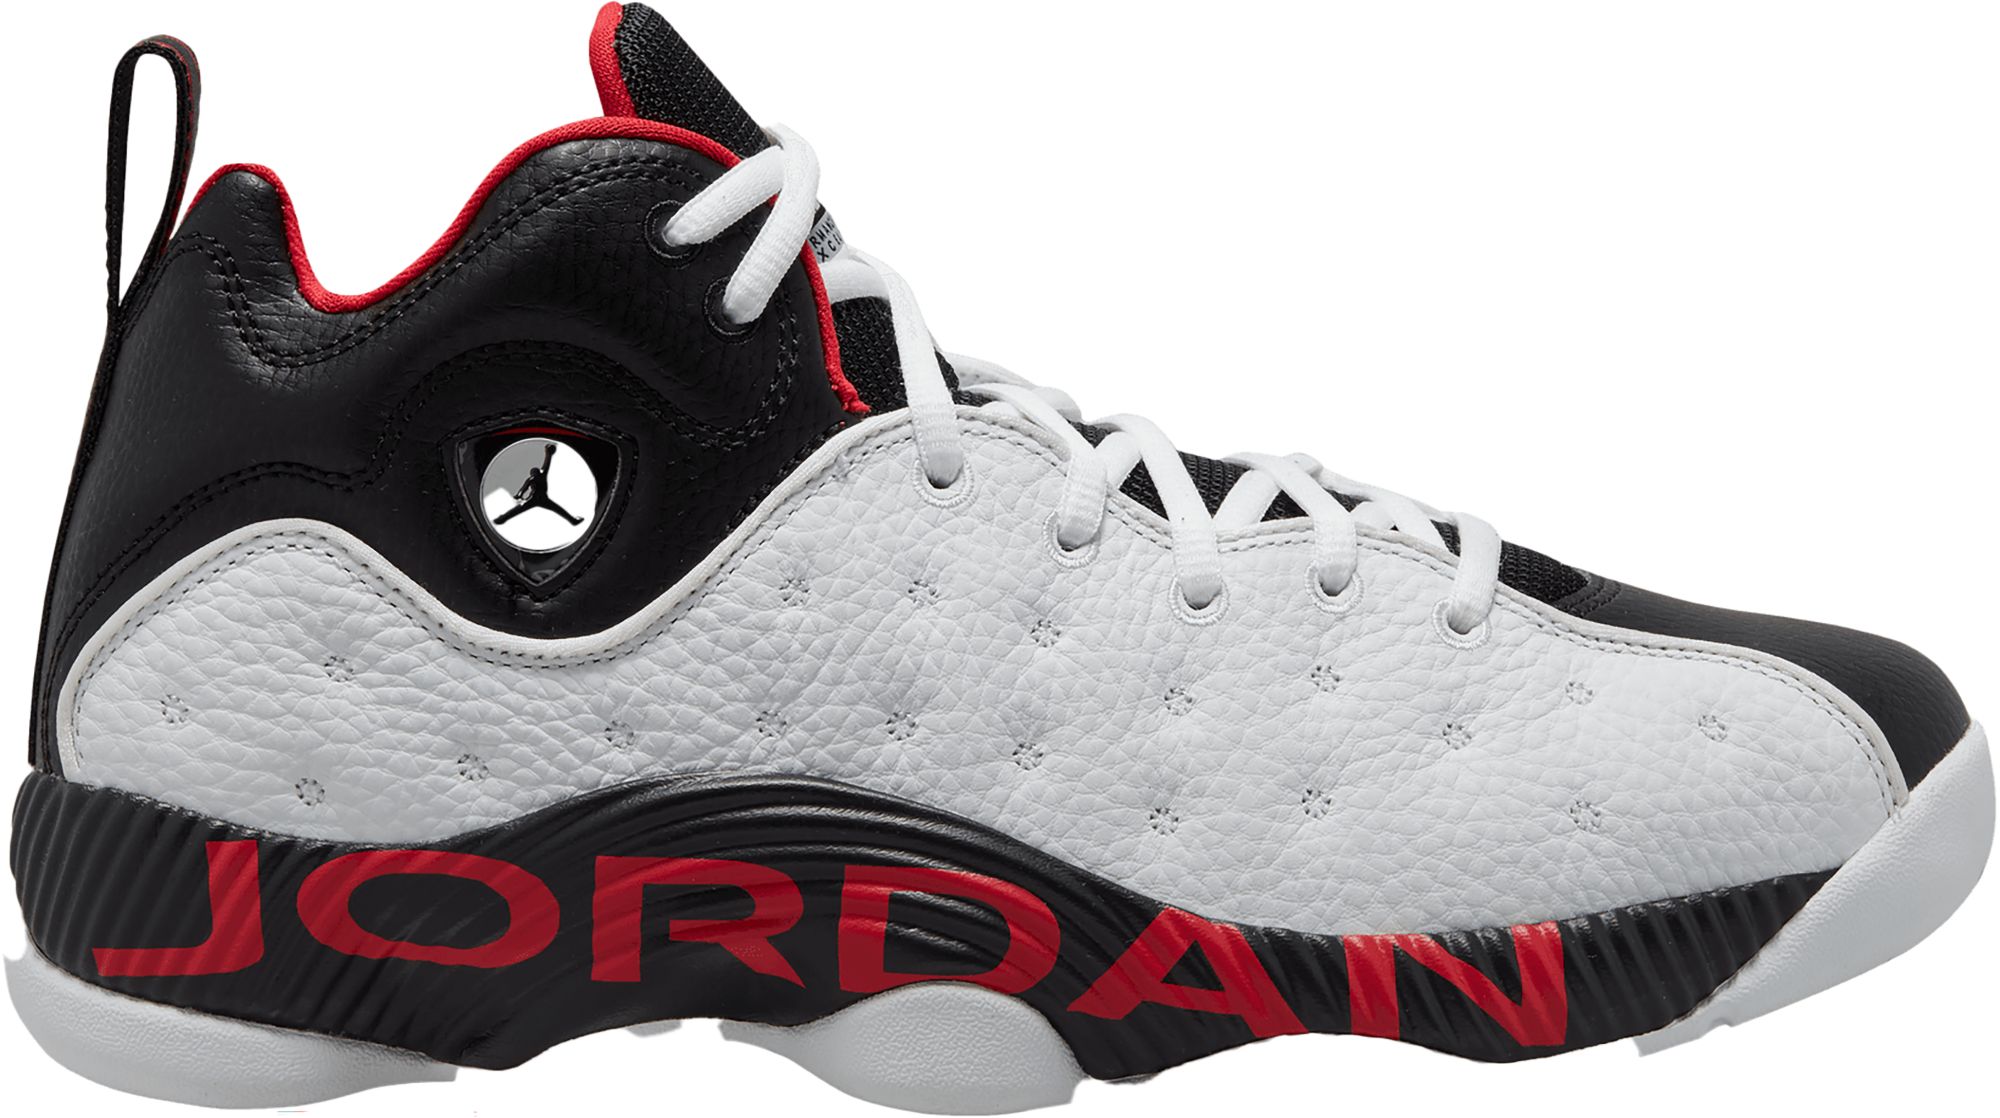 difference between team jordans and retro